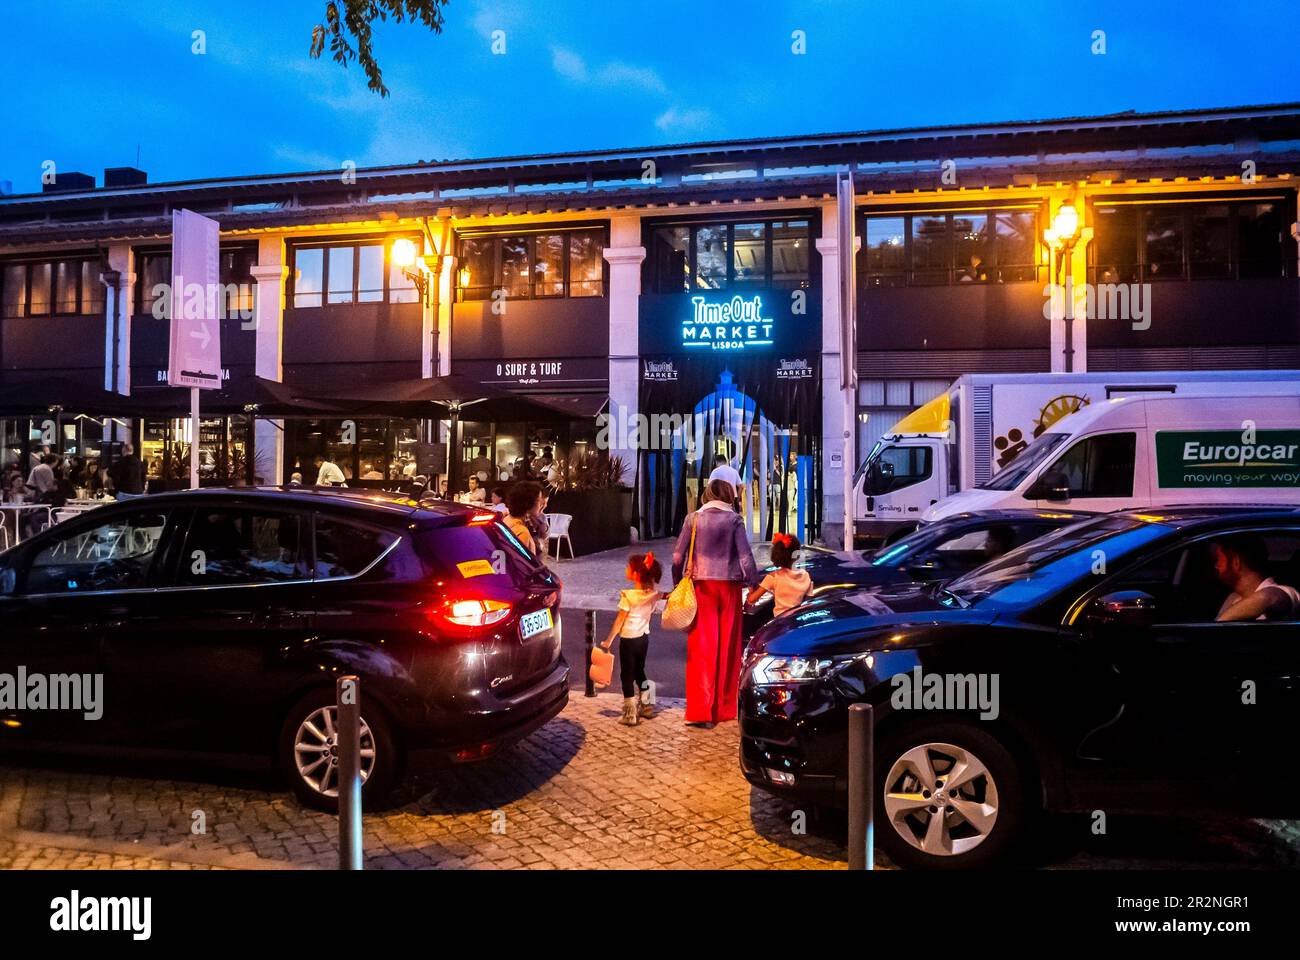 Lisbon, Portugal, People, Mum with children,  Entering into Building Local Food Market, Time Out Market, Front at Night, Street Scene with Cars Stock Photo